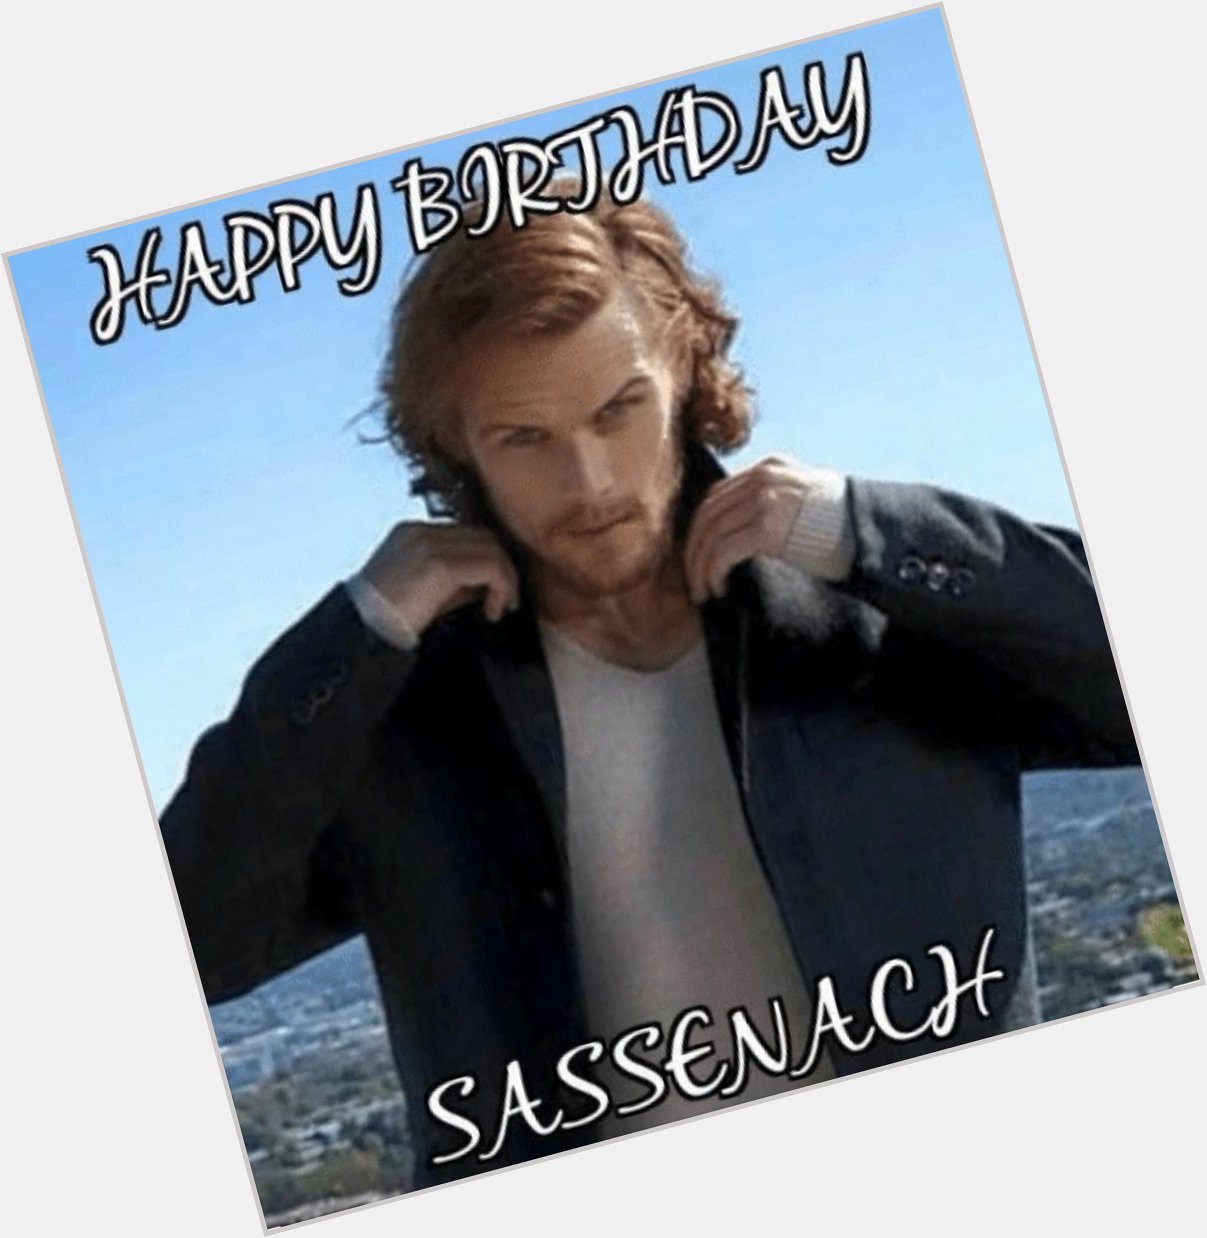   I\m not Sam, but the Church of Sam Heughan wishes you a Very Happy Birthday!!   